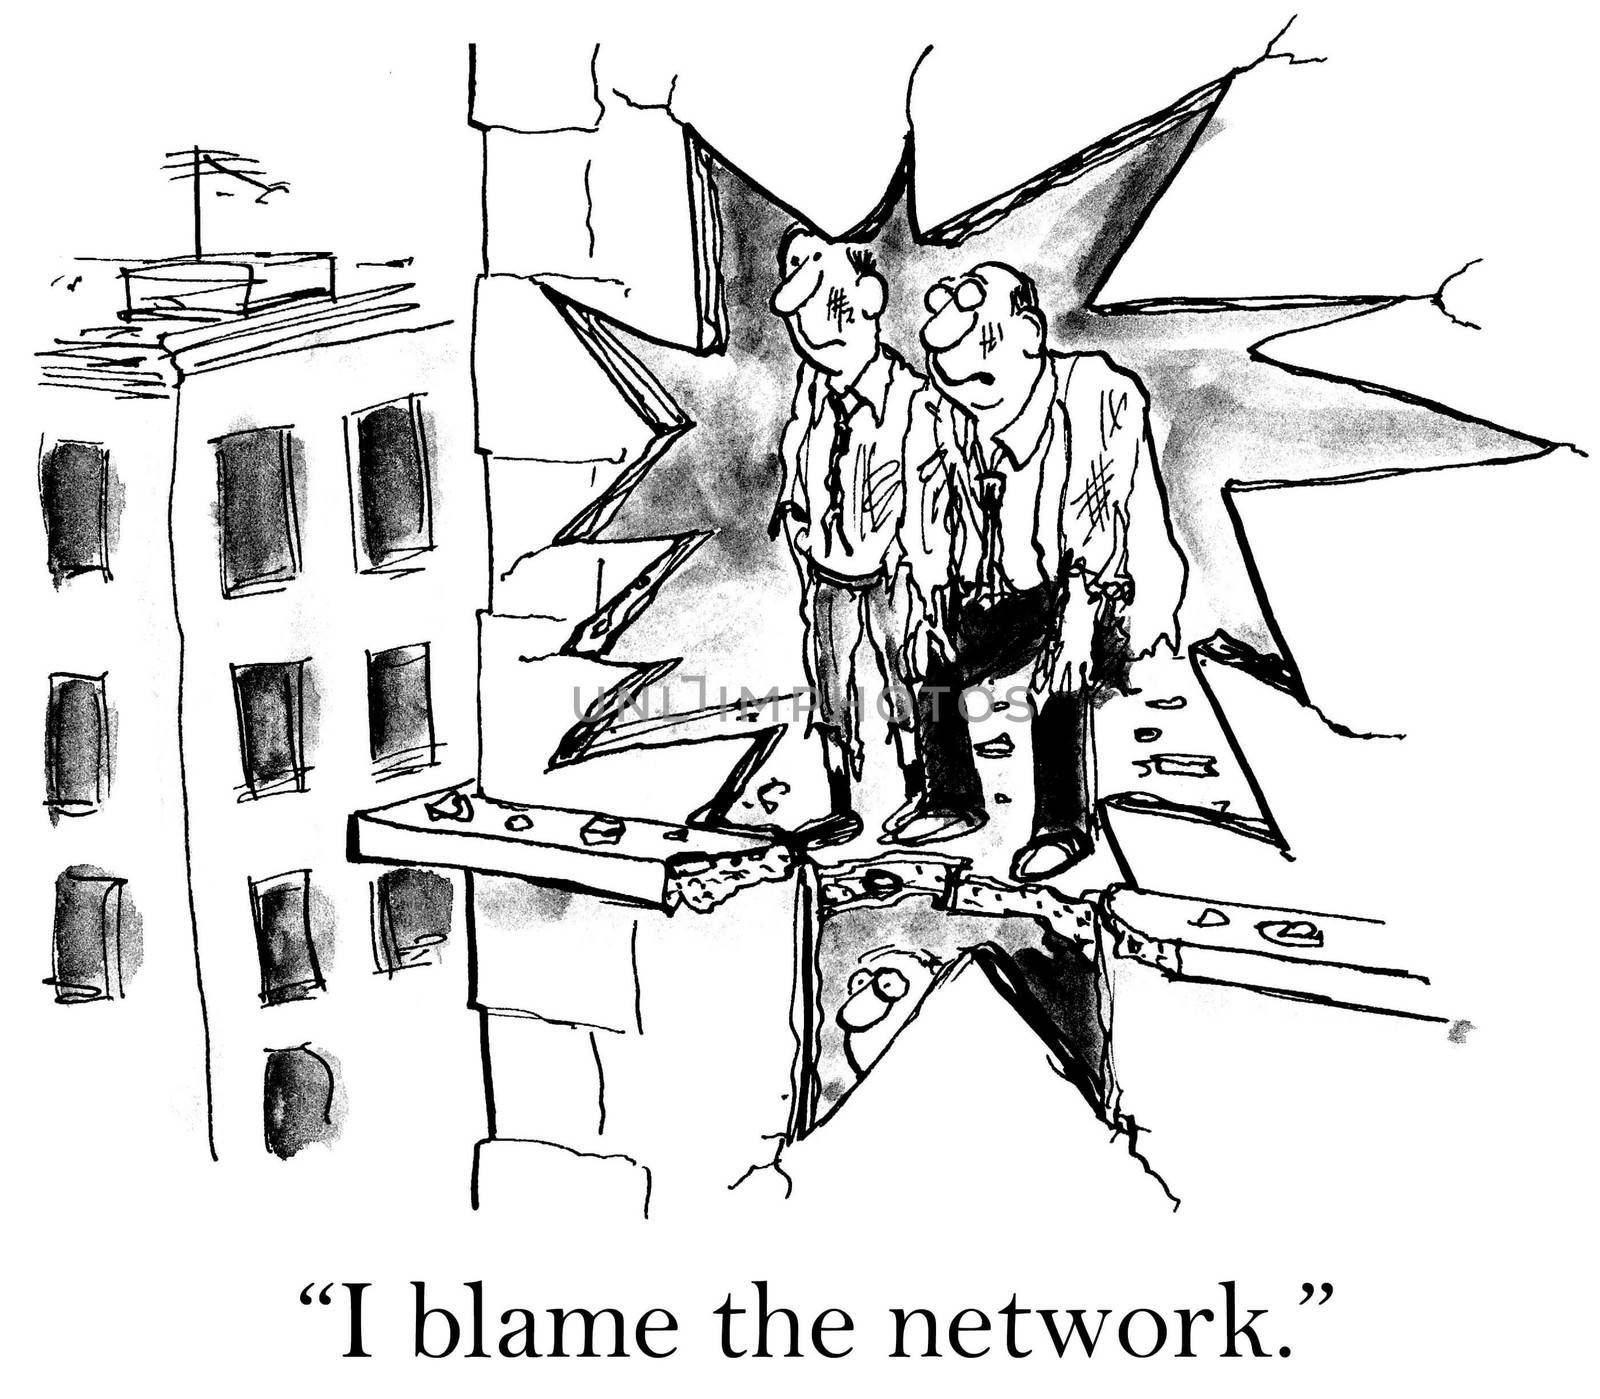 "I blame the network." two executives at exploded hole.